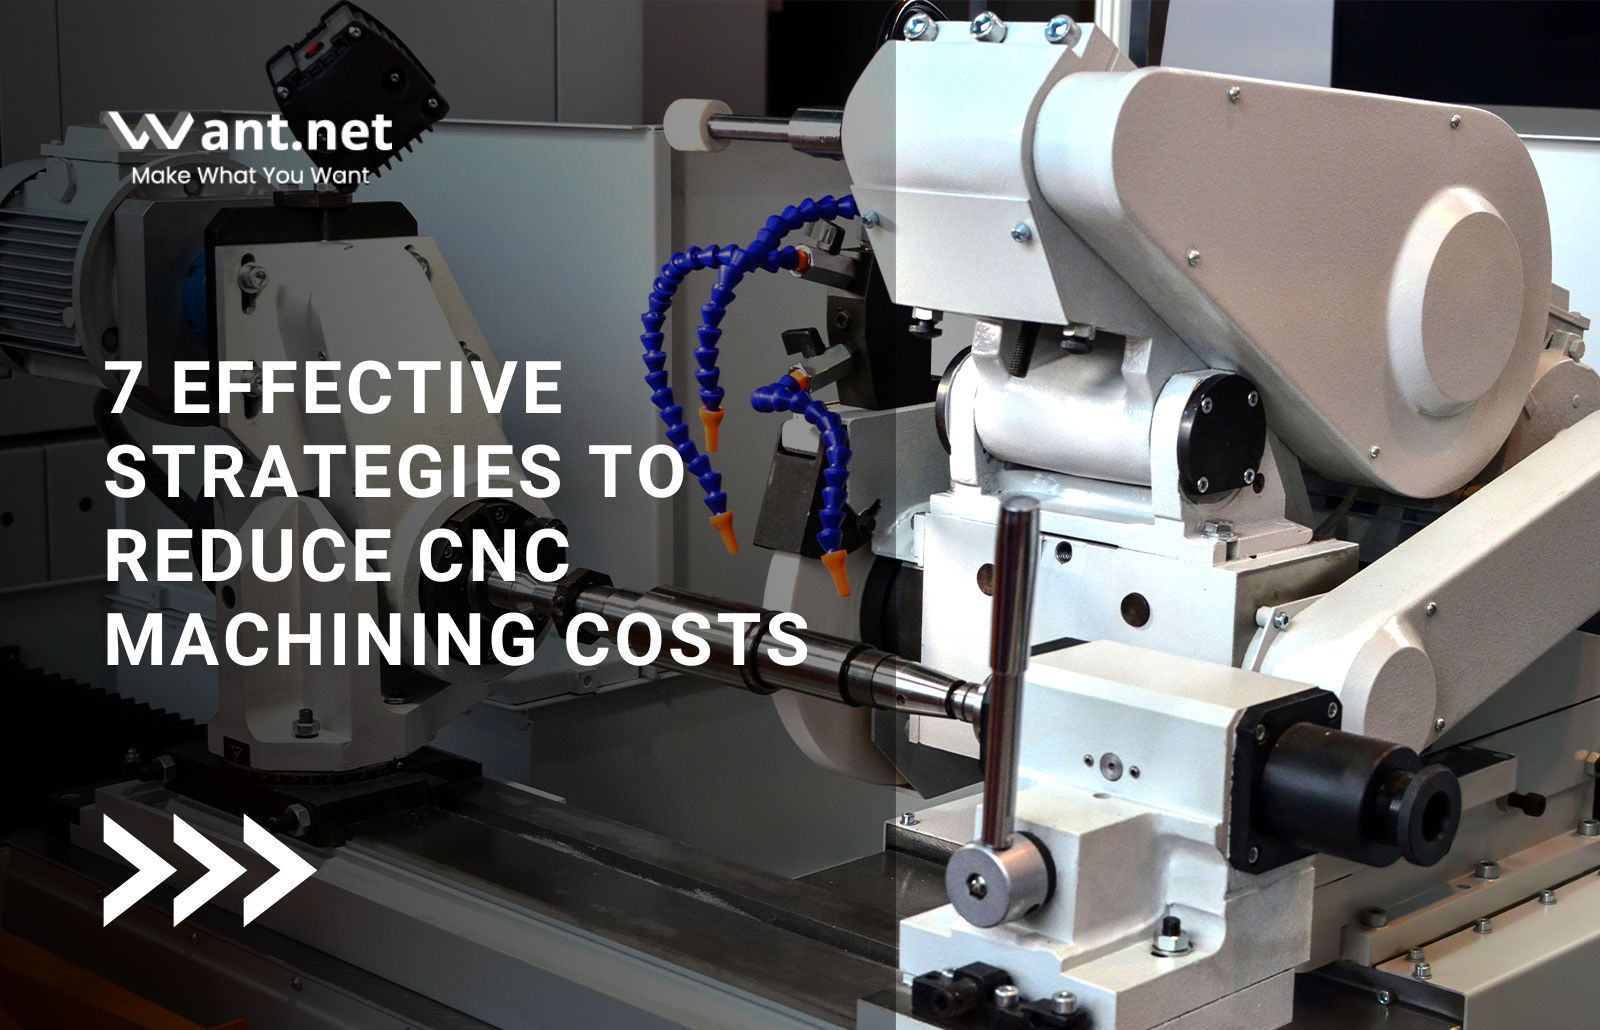 7 Effective Strategies to Reduce CNC Machining Costs